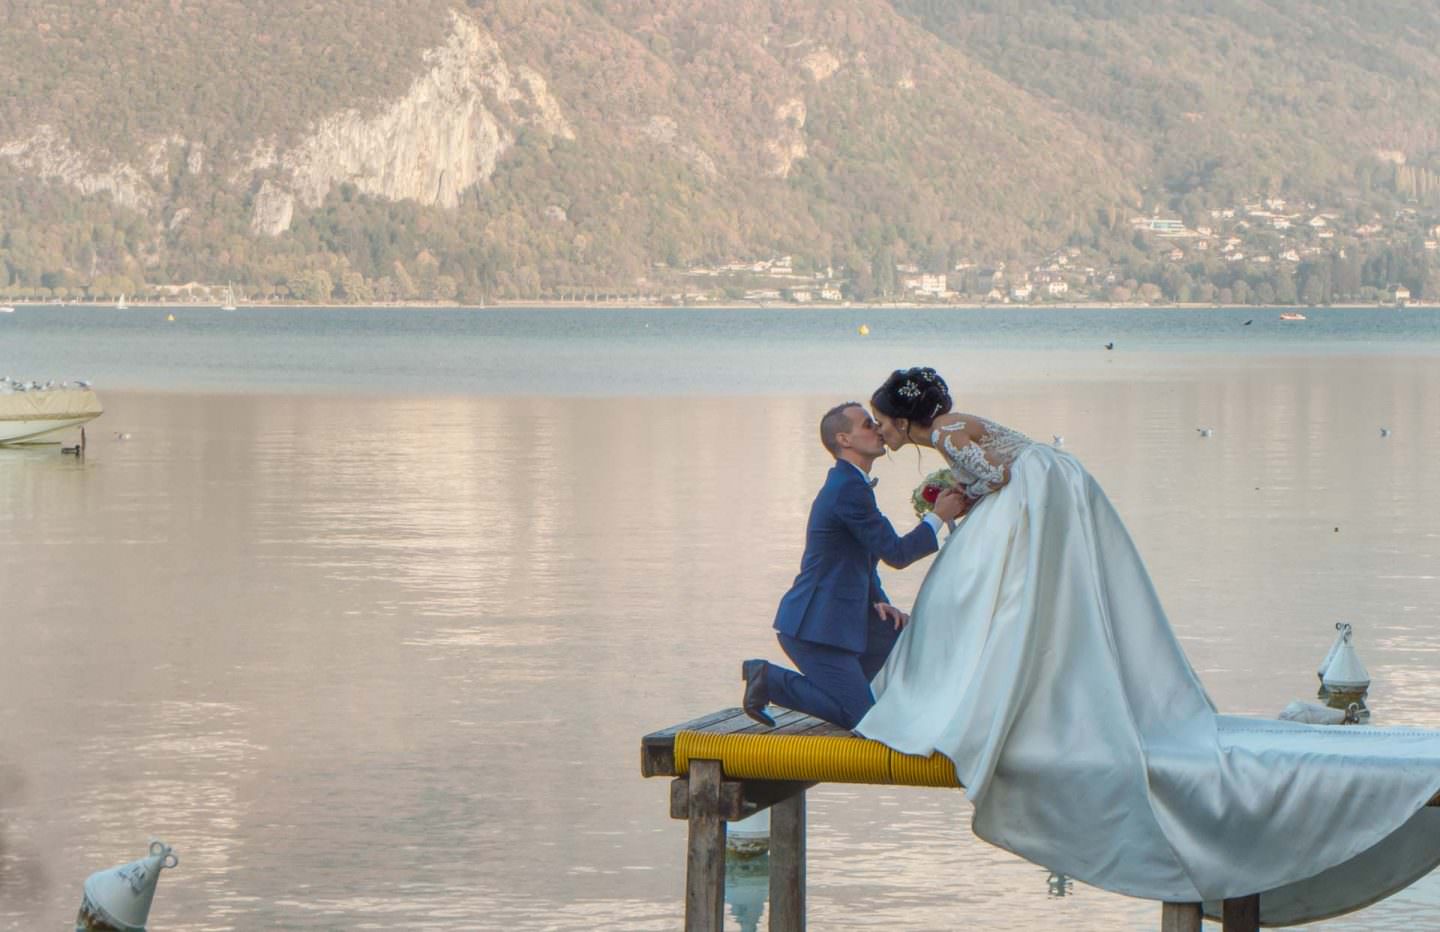 Bride and Groom on beautiful Lake Annecy, France.  International wedding photographer
